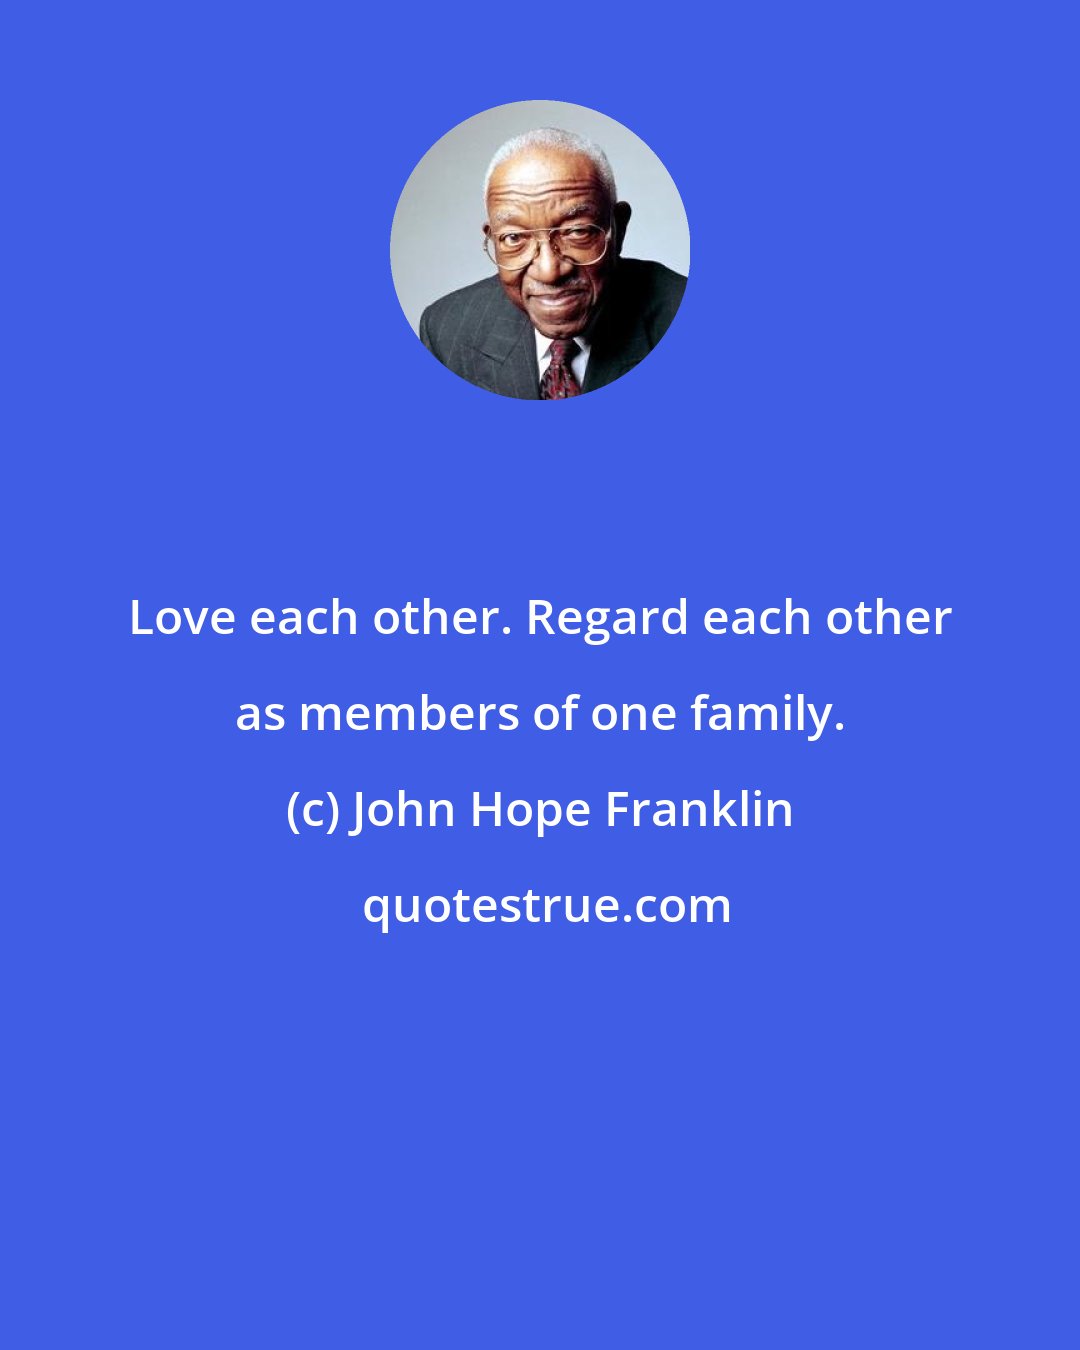 John Hope Franklin: Love each other. Regard each other as members of one family.